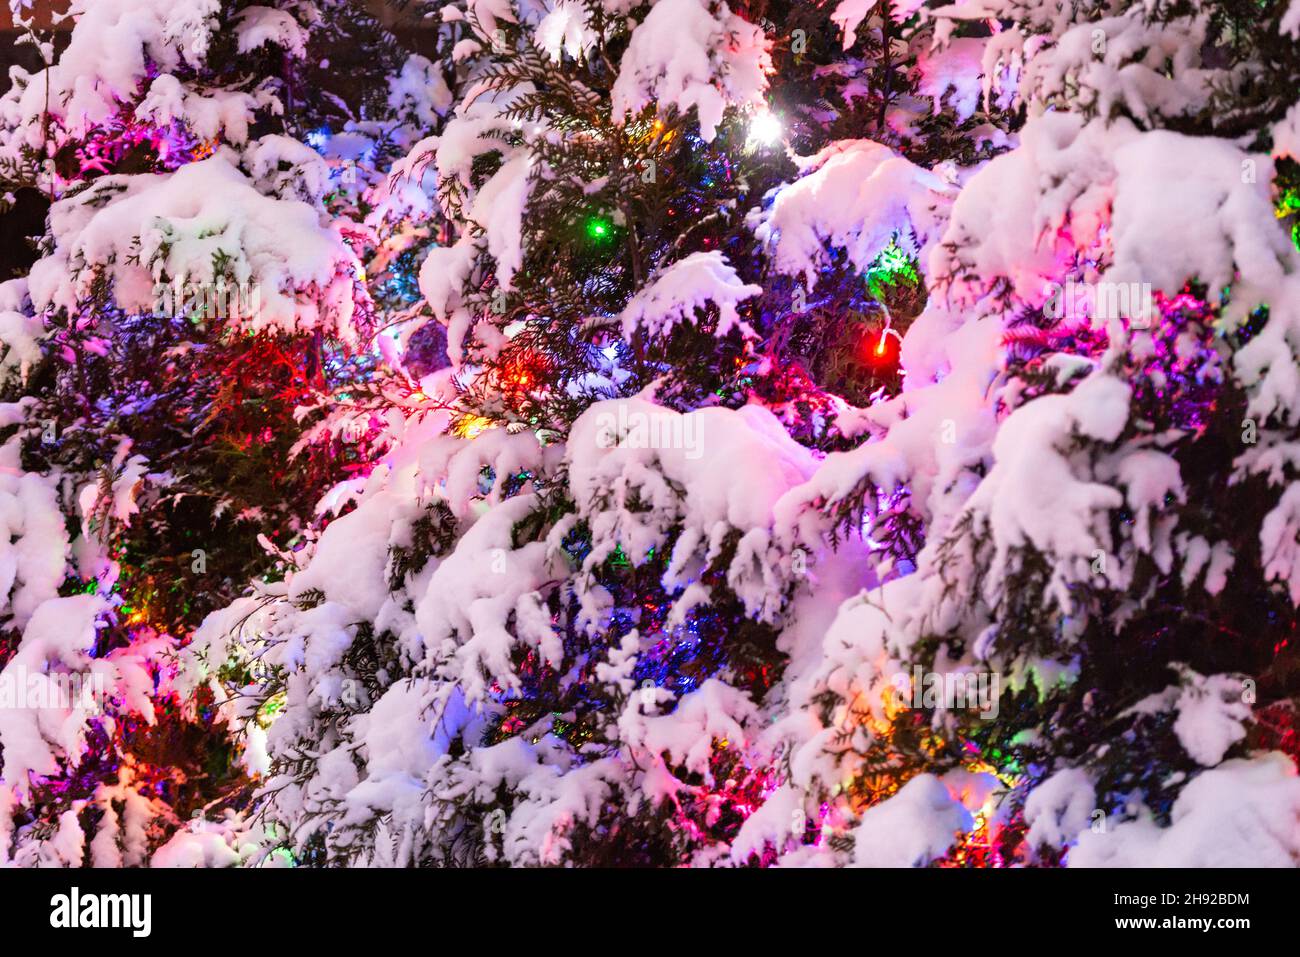 Garland among the branches of thuja. Garland under the snow close-up. The wall of tui under the snow is decorated for the new year. Stock Photo